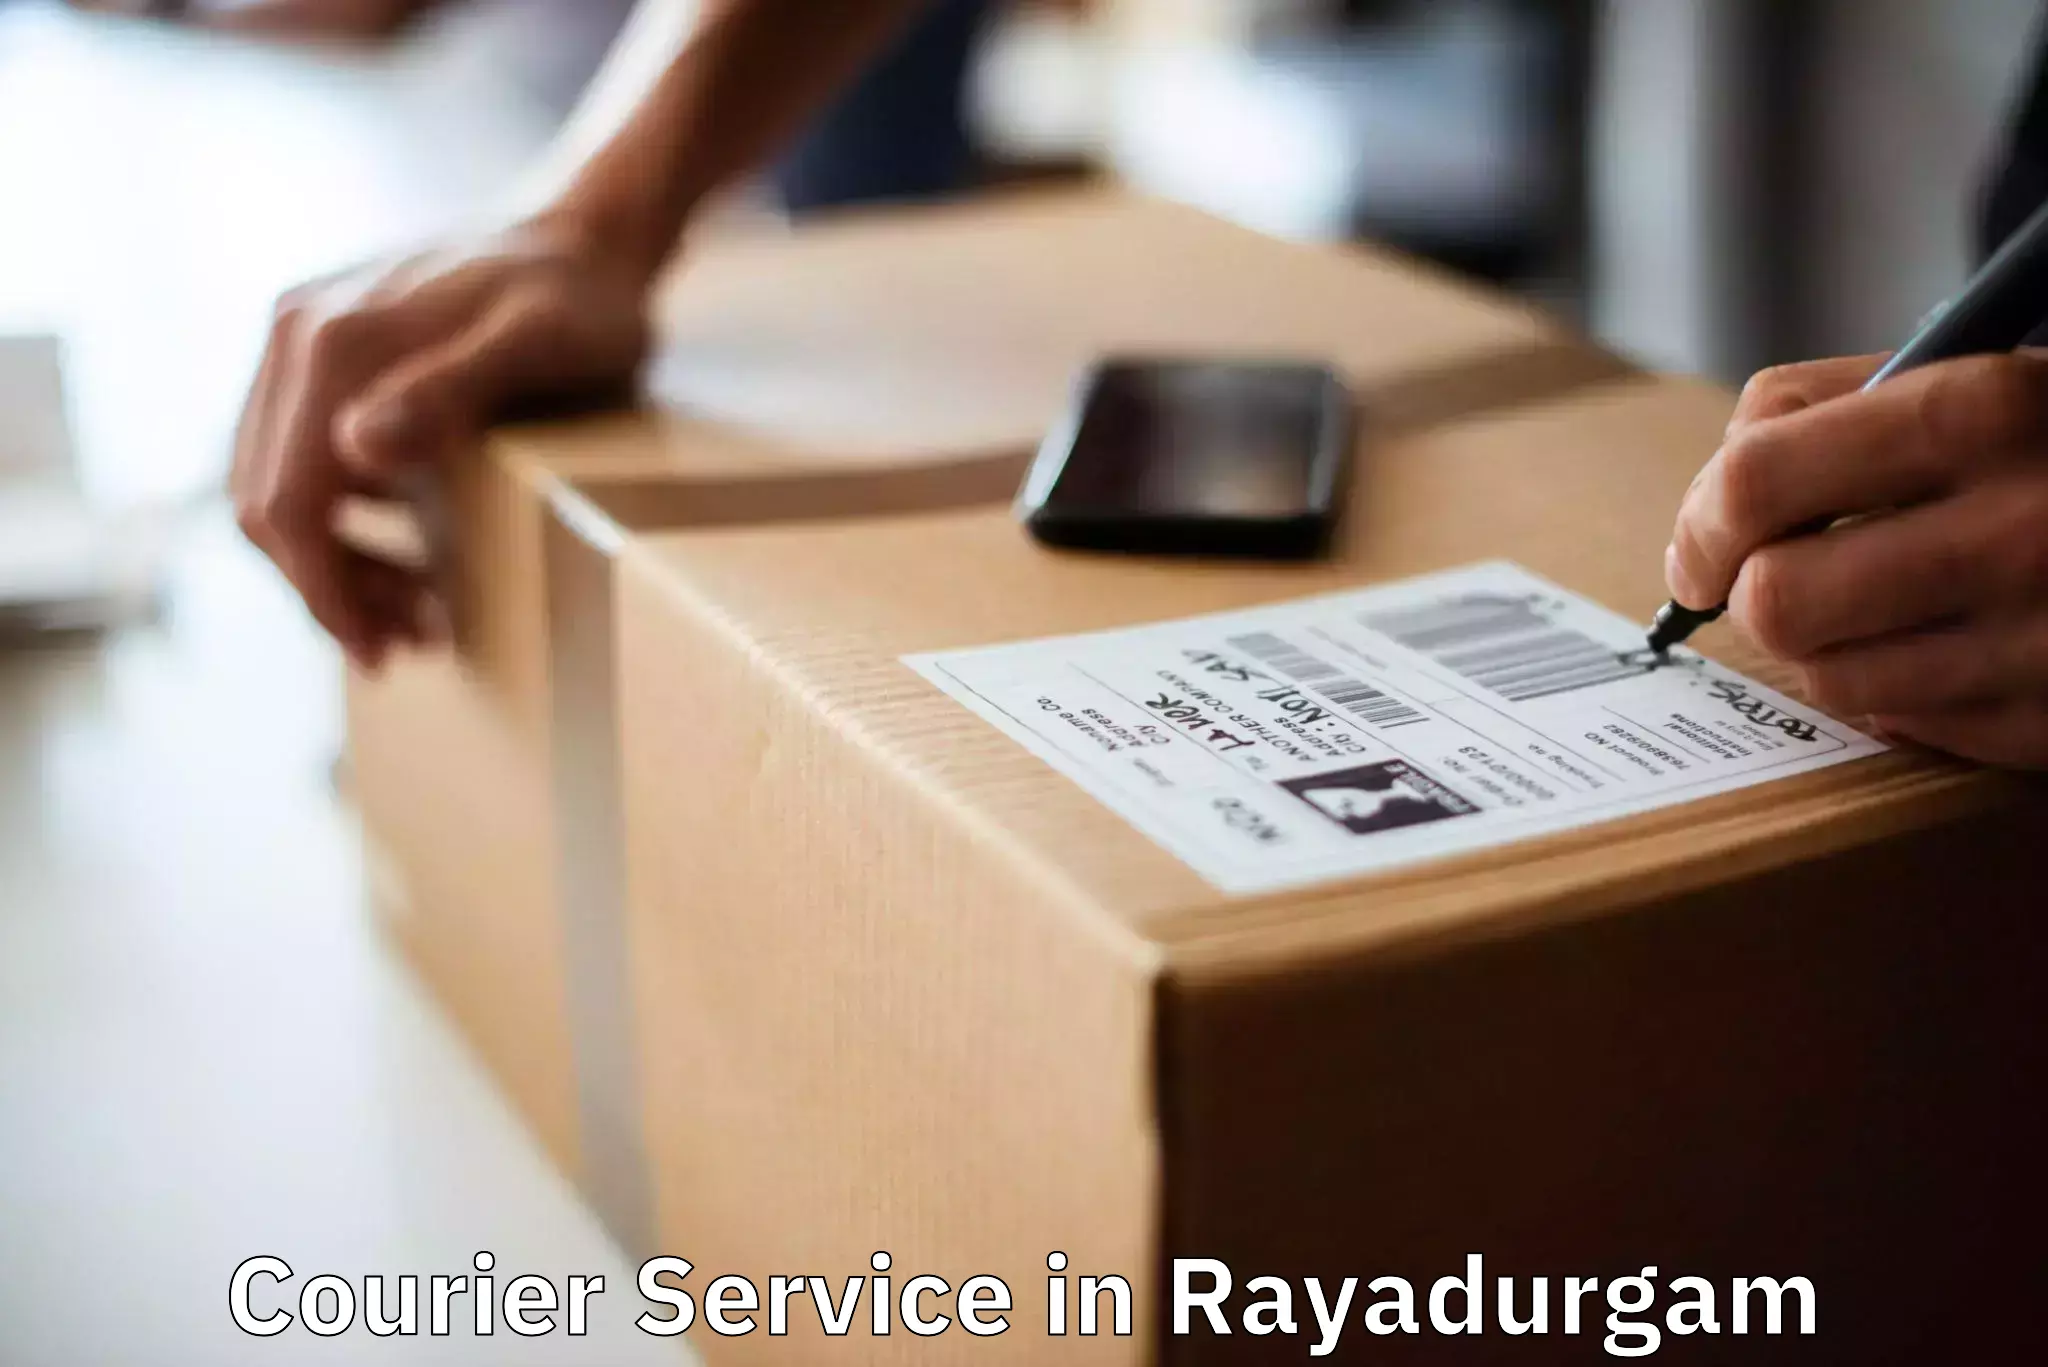 24/7 courier service in Rayadurgam